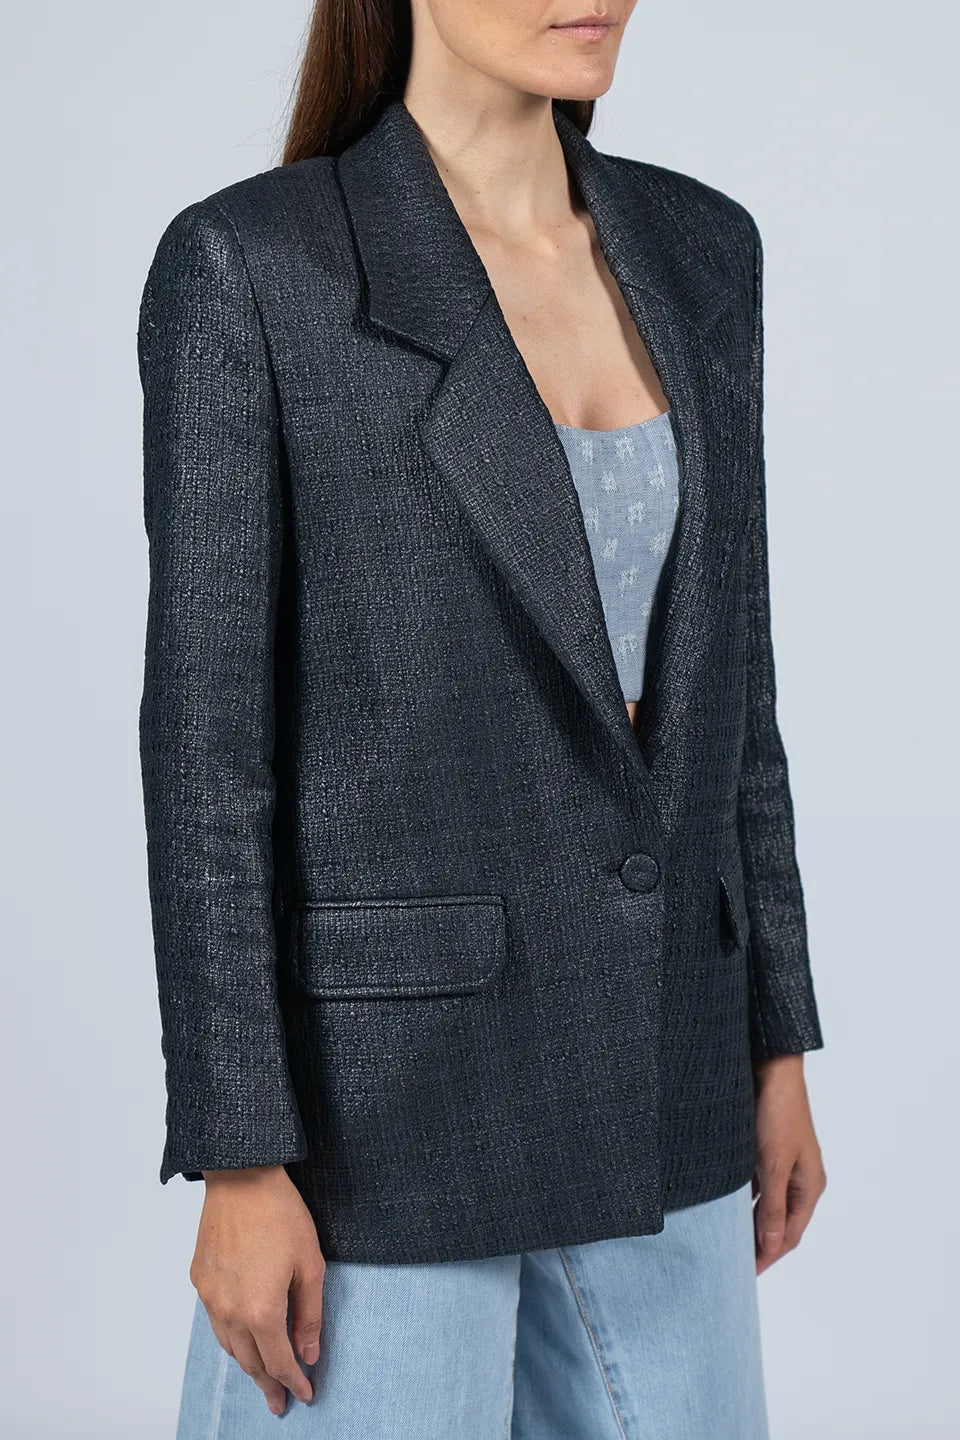 Designer Black Women blazers, Jacket, shop online with free delivery in UAE. Product gallery 2